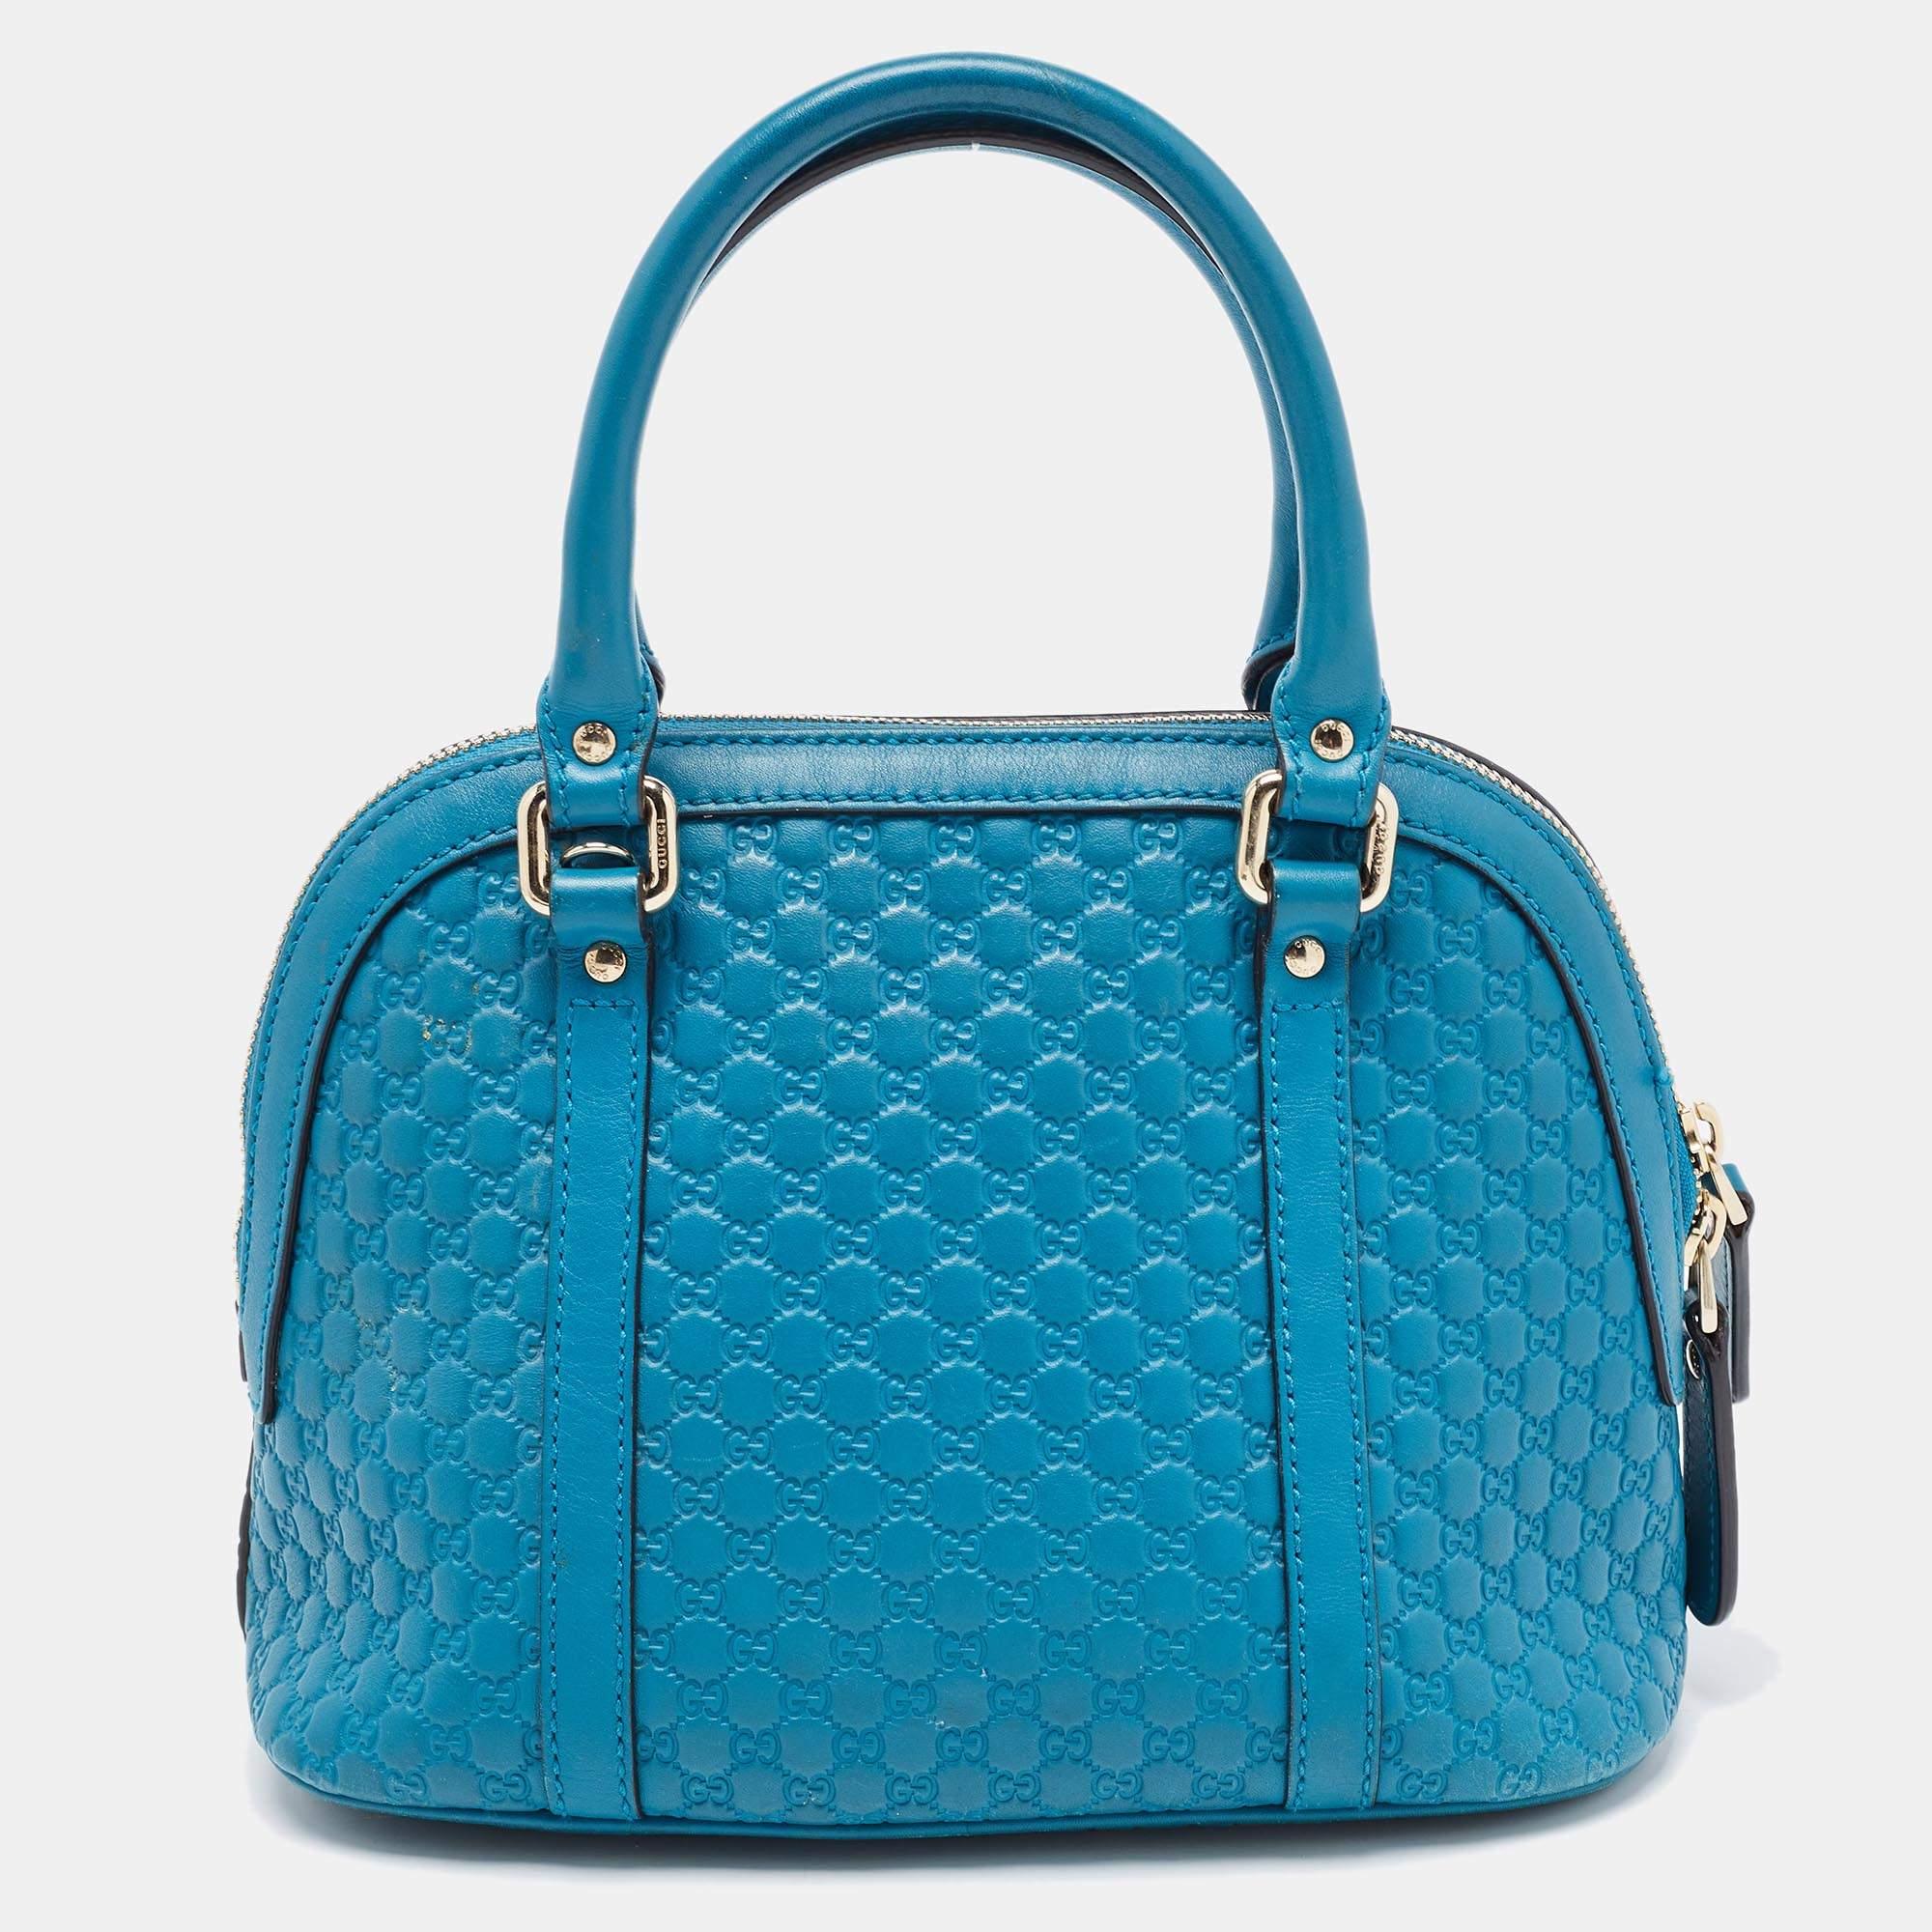 Indulge in luxury with this Gucci blue bag. Meticulously crafted from premium materials, it combines exquisite design, impeccable craftsmanship, and timeless elegance. Elevate your style with this fashion accessory.

Includes: Original Dustbag

